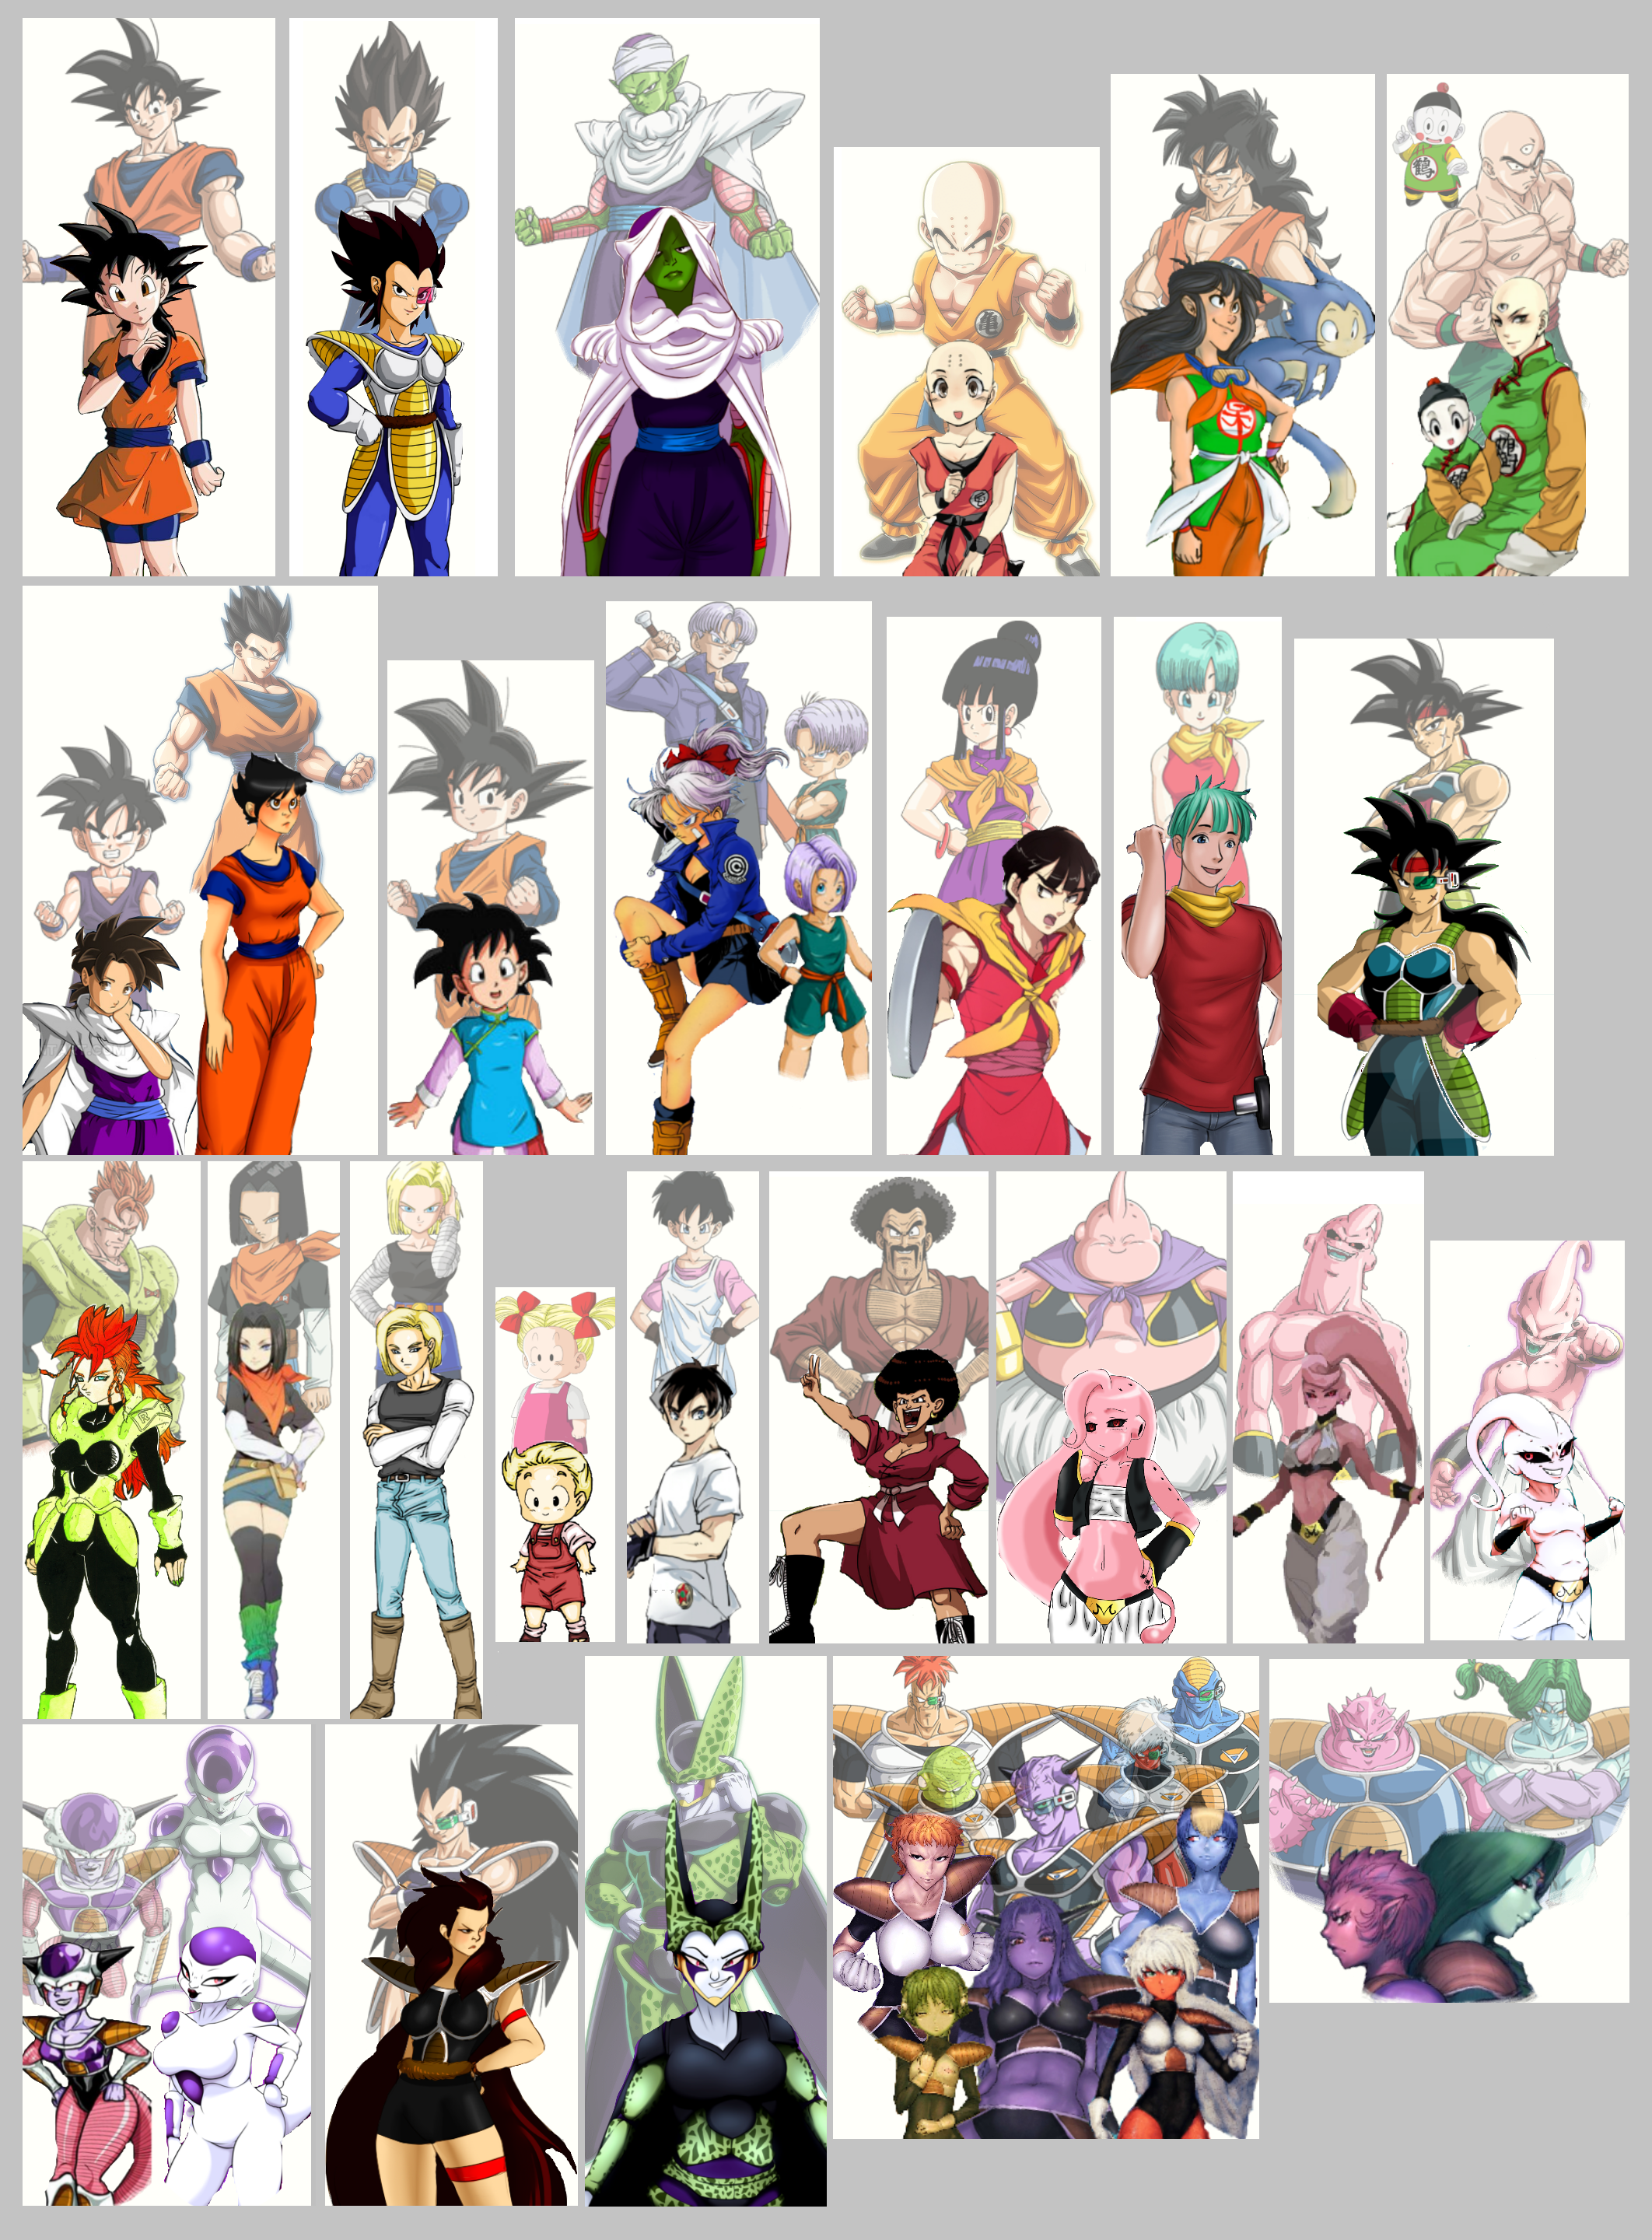 Dragon Ball Z Genderbended Cast by AwesomeOKingGuy on DeviantArt